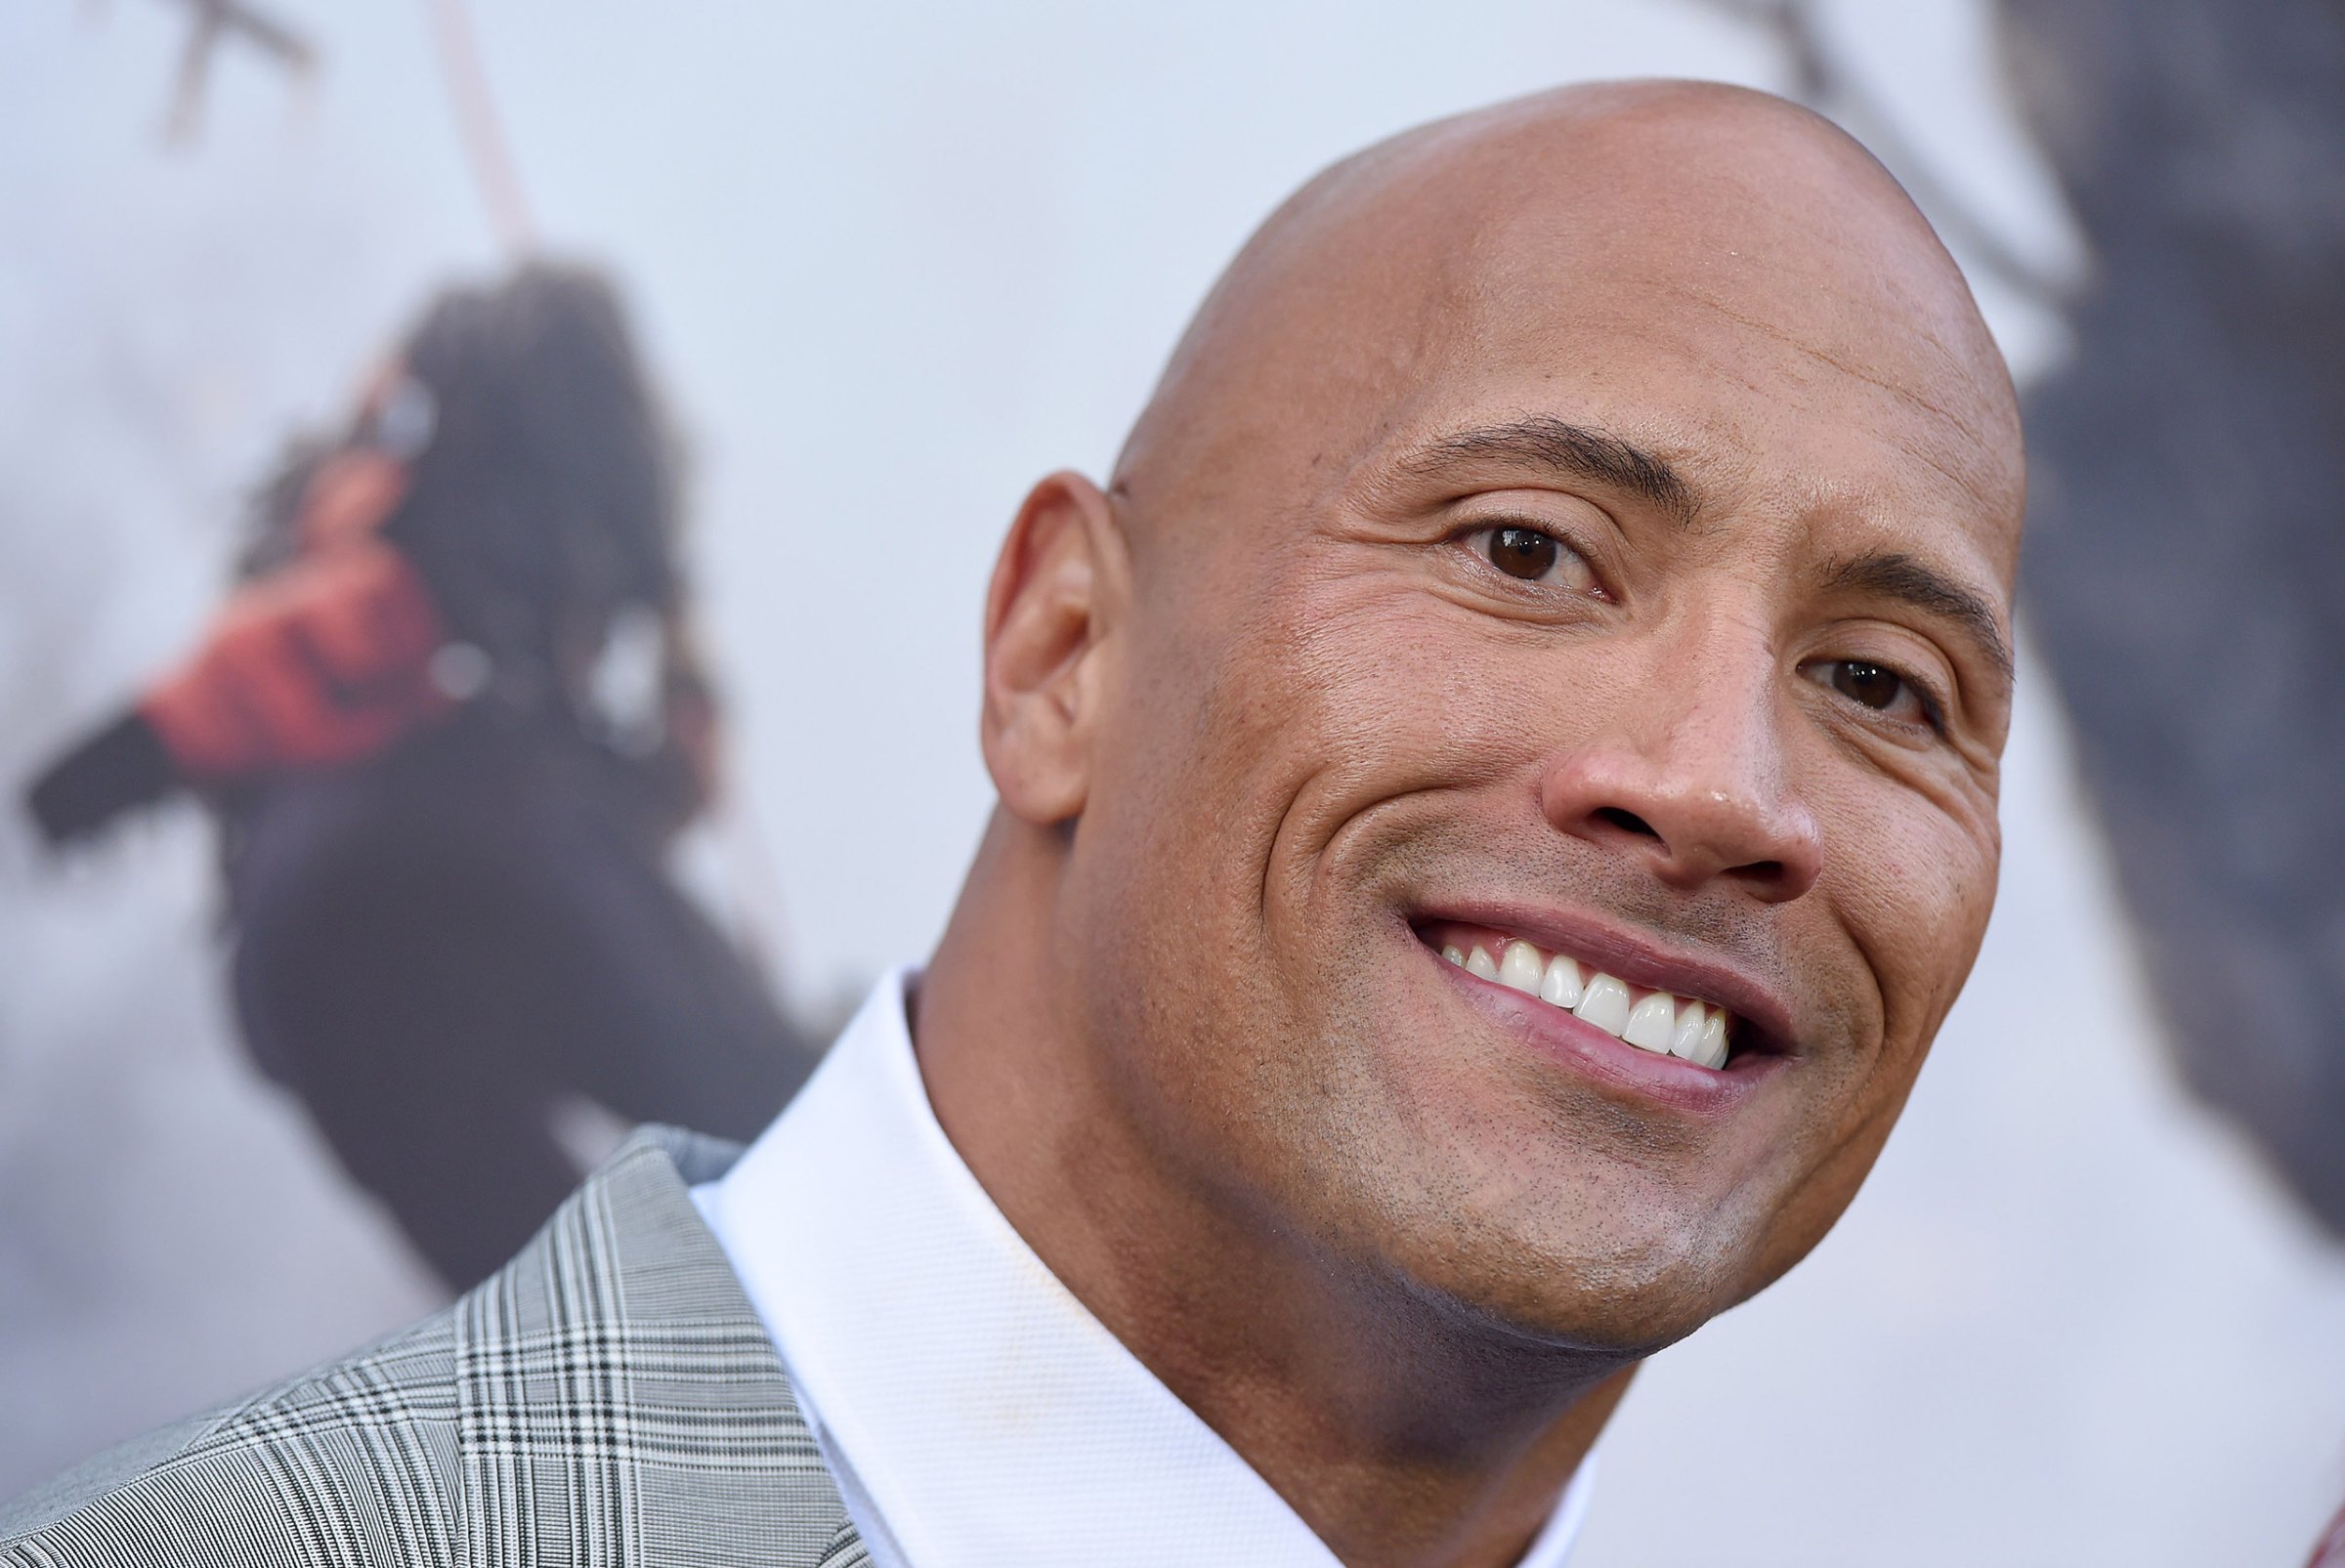 Dwayne 'The Rock' Johnson in Hollywood, Calif., May 26, 2015